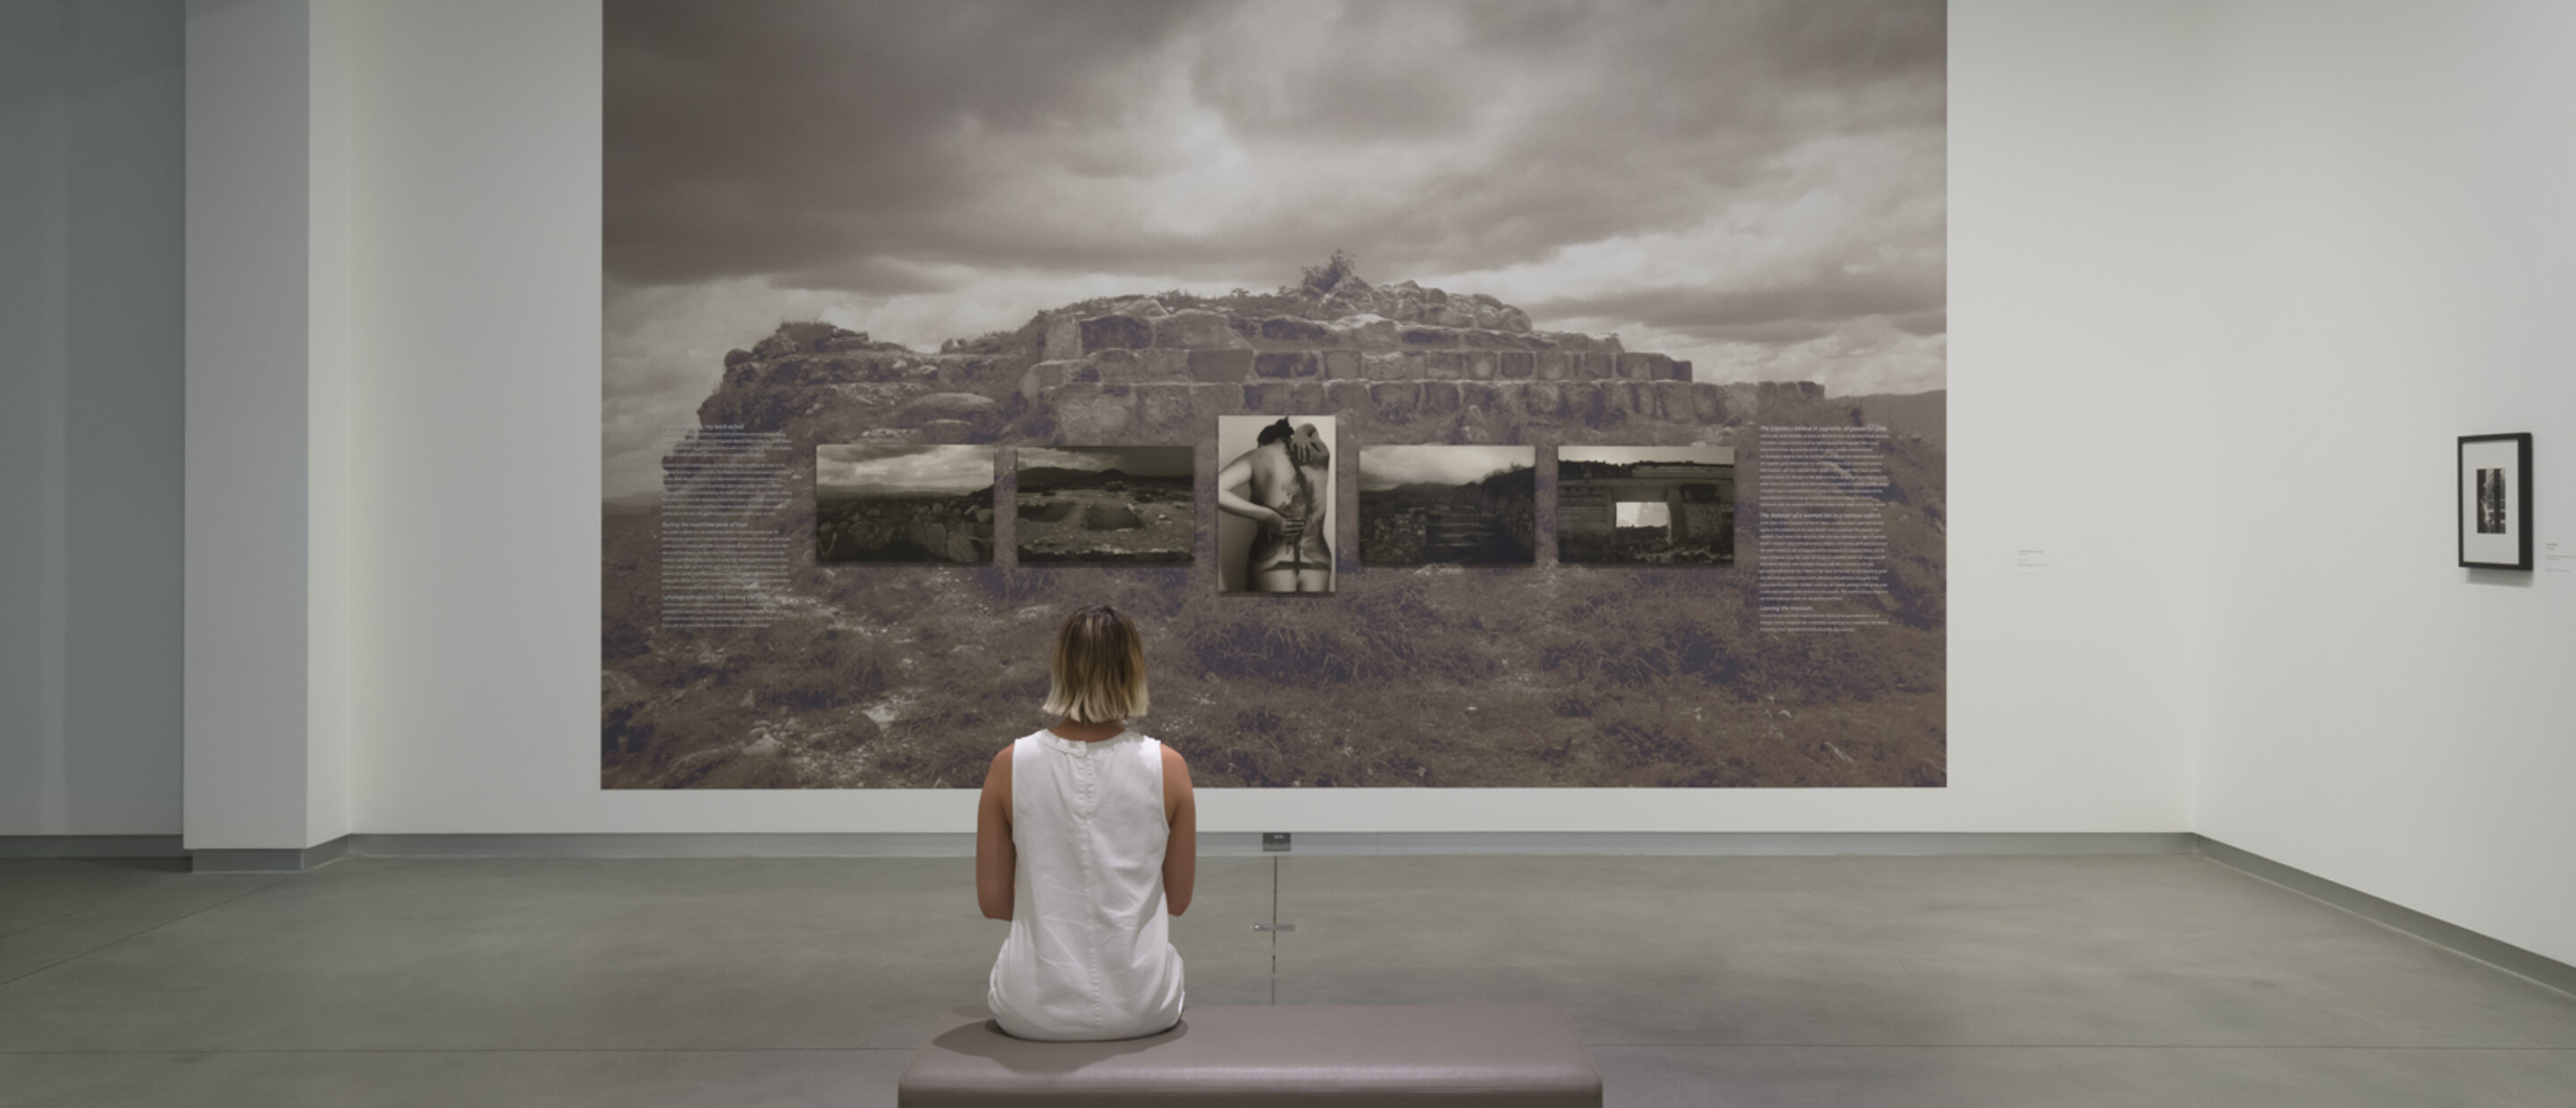 woman sits on bench in gallery in front of larger gray photograph on the wall